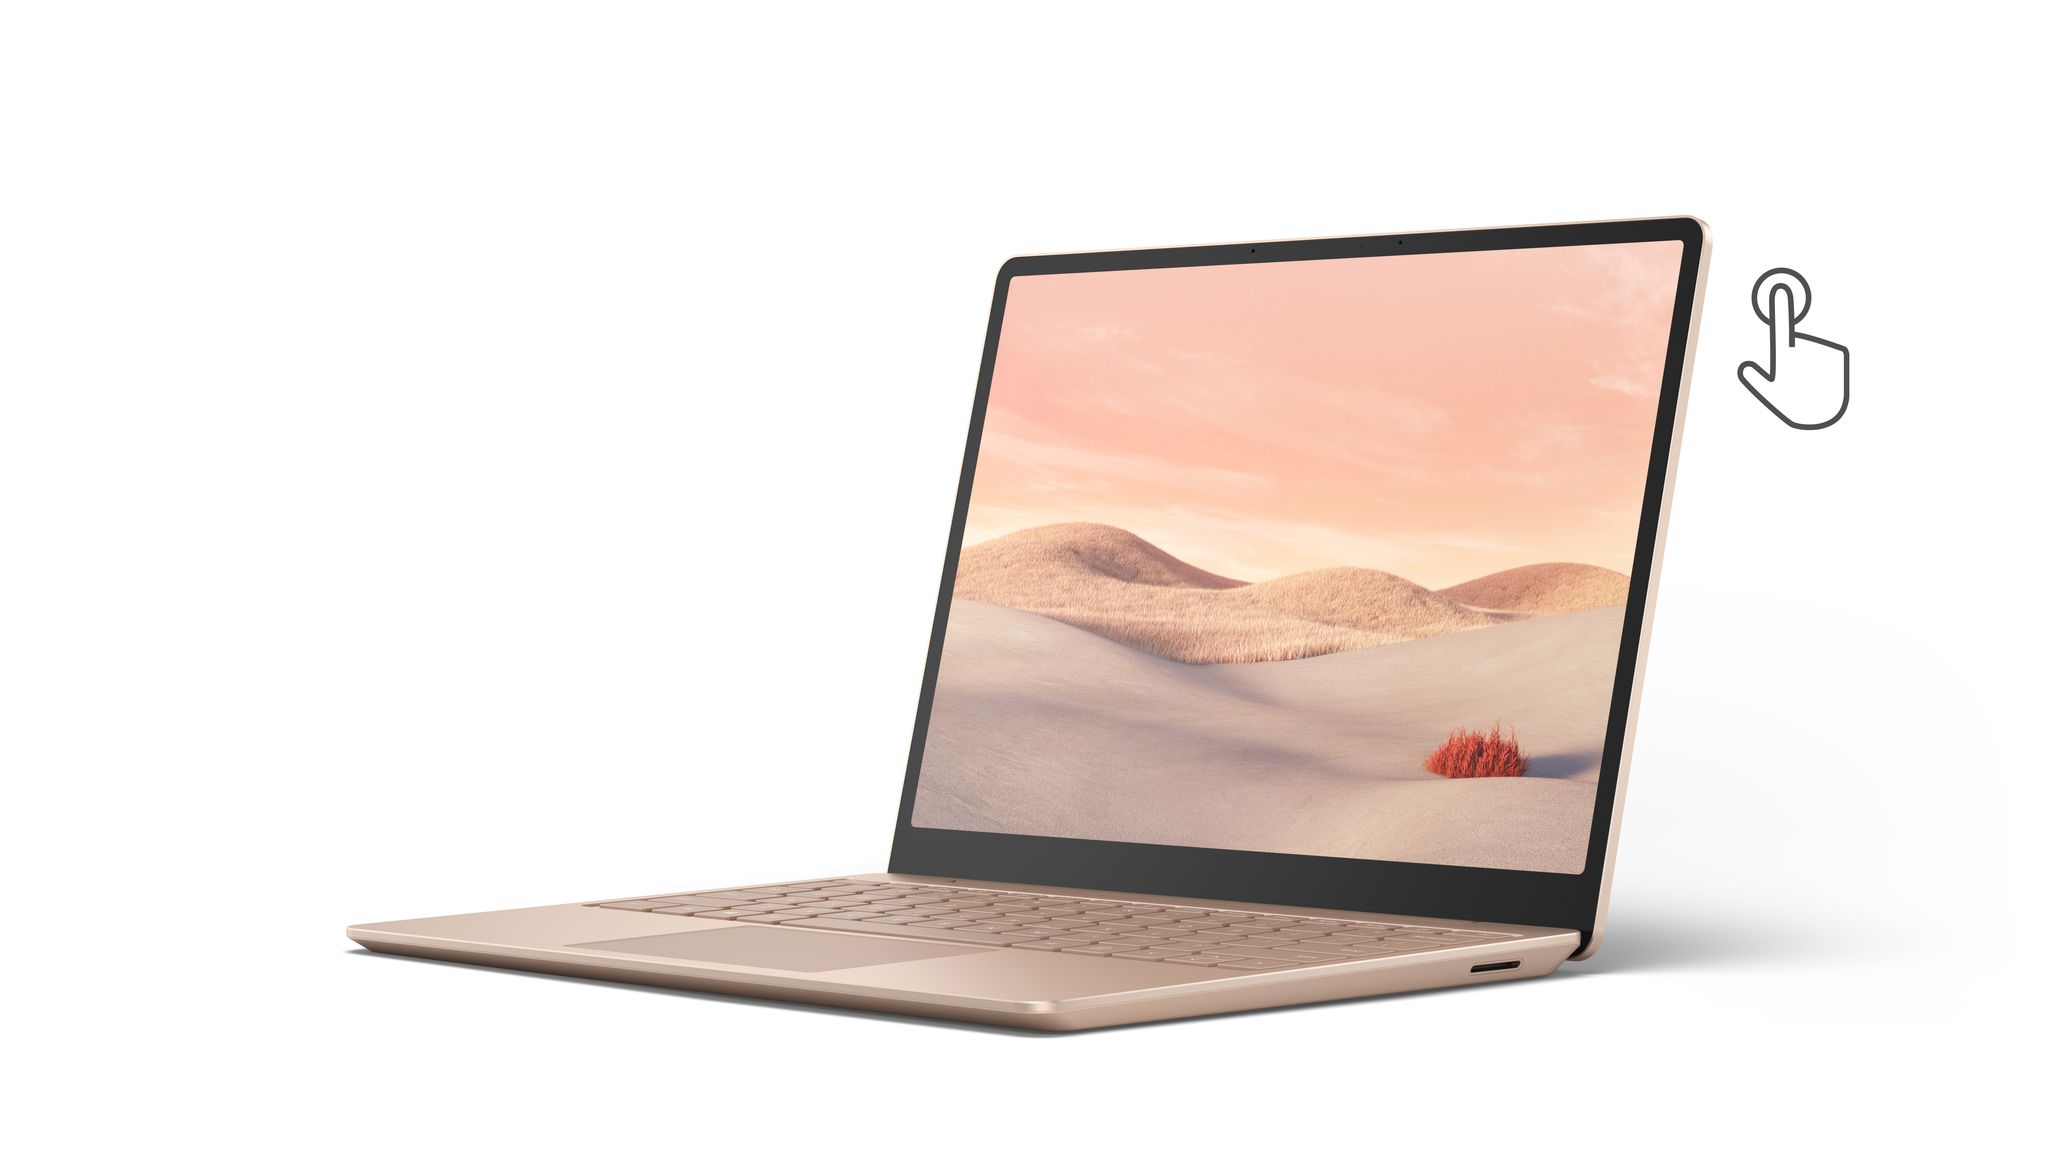 Microsoft Surface Laptop Go, 12.4" Touchscreen, Intel Core i5-1035G1, 8GB Memory, 128GB SSD, Sandstone, THH-00035 - image 1 of 6